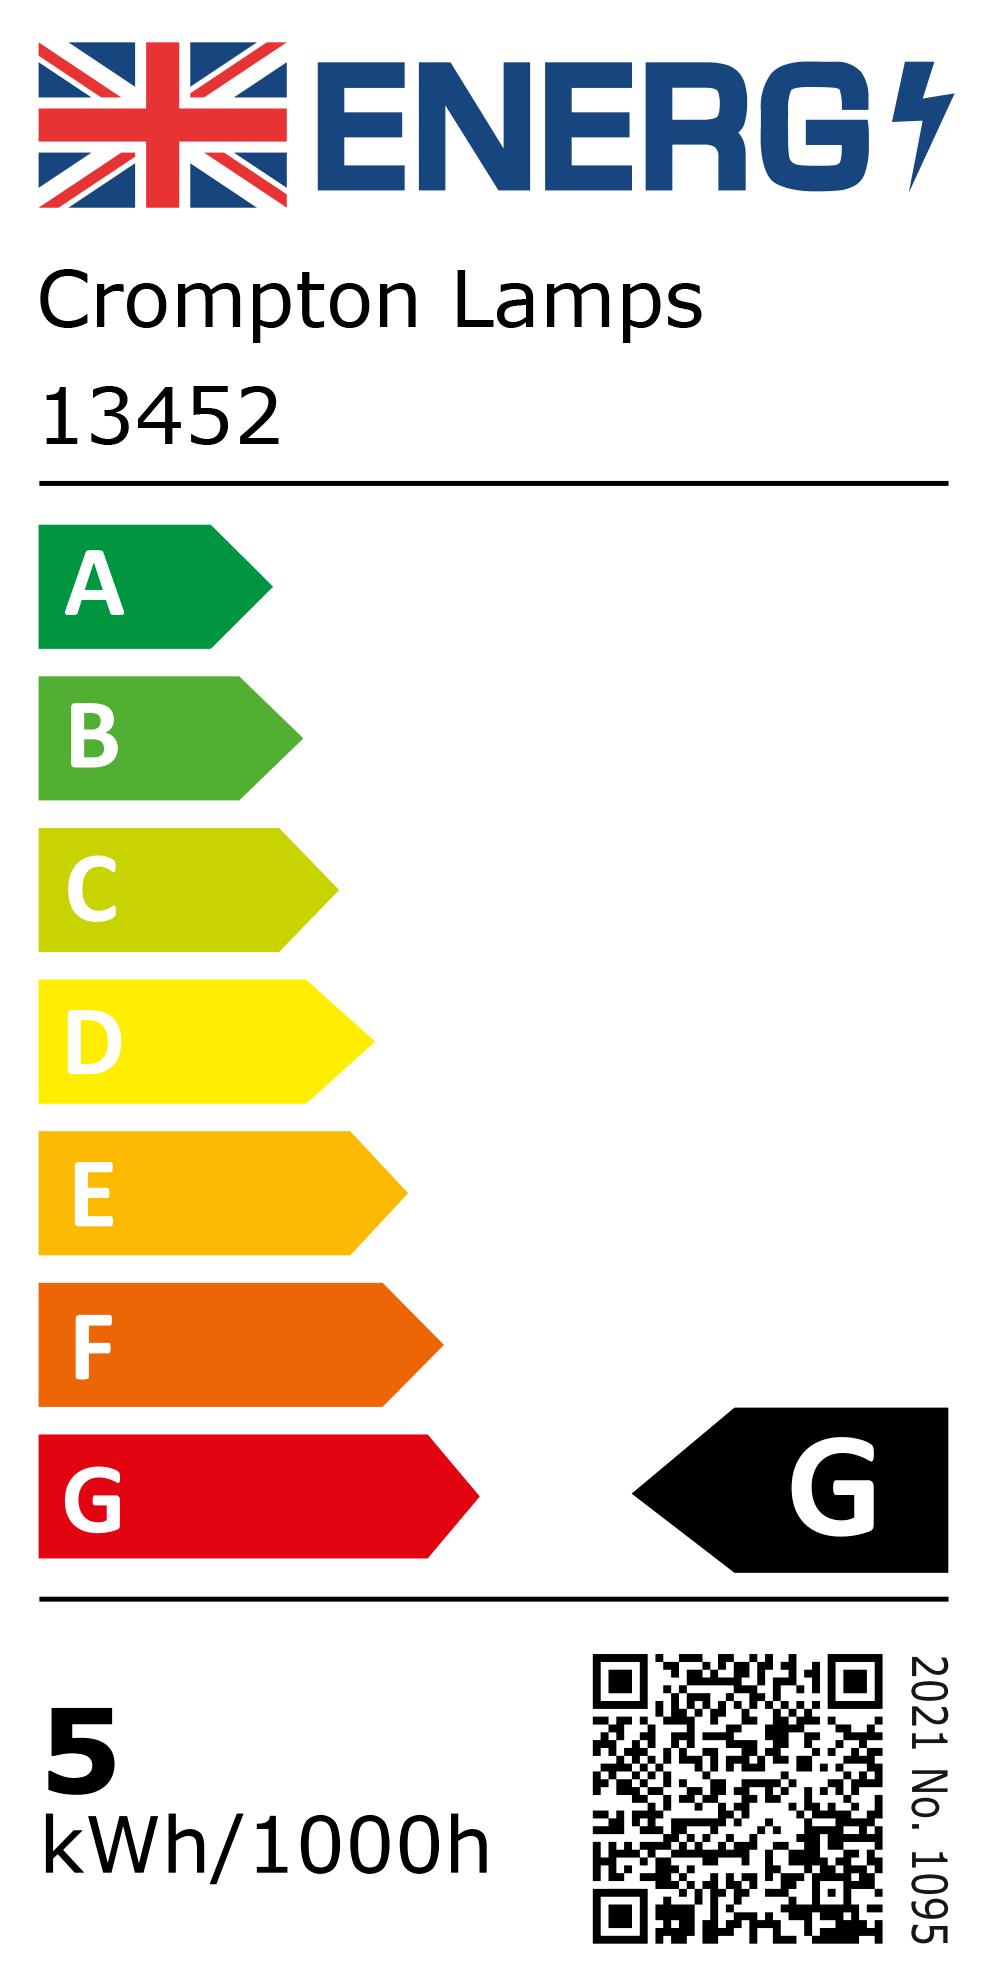 New 2021 Energy Rating Label: Stock Code 13452